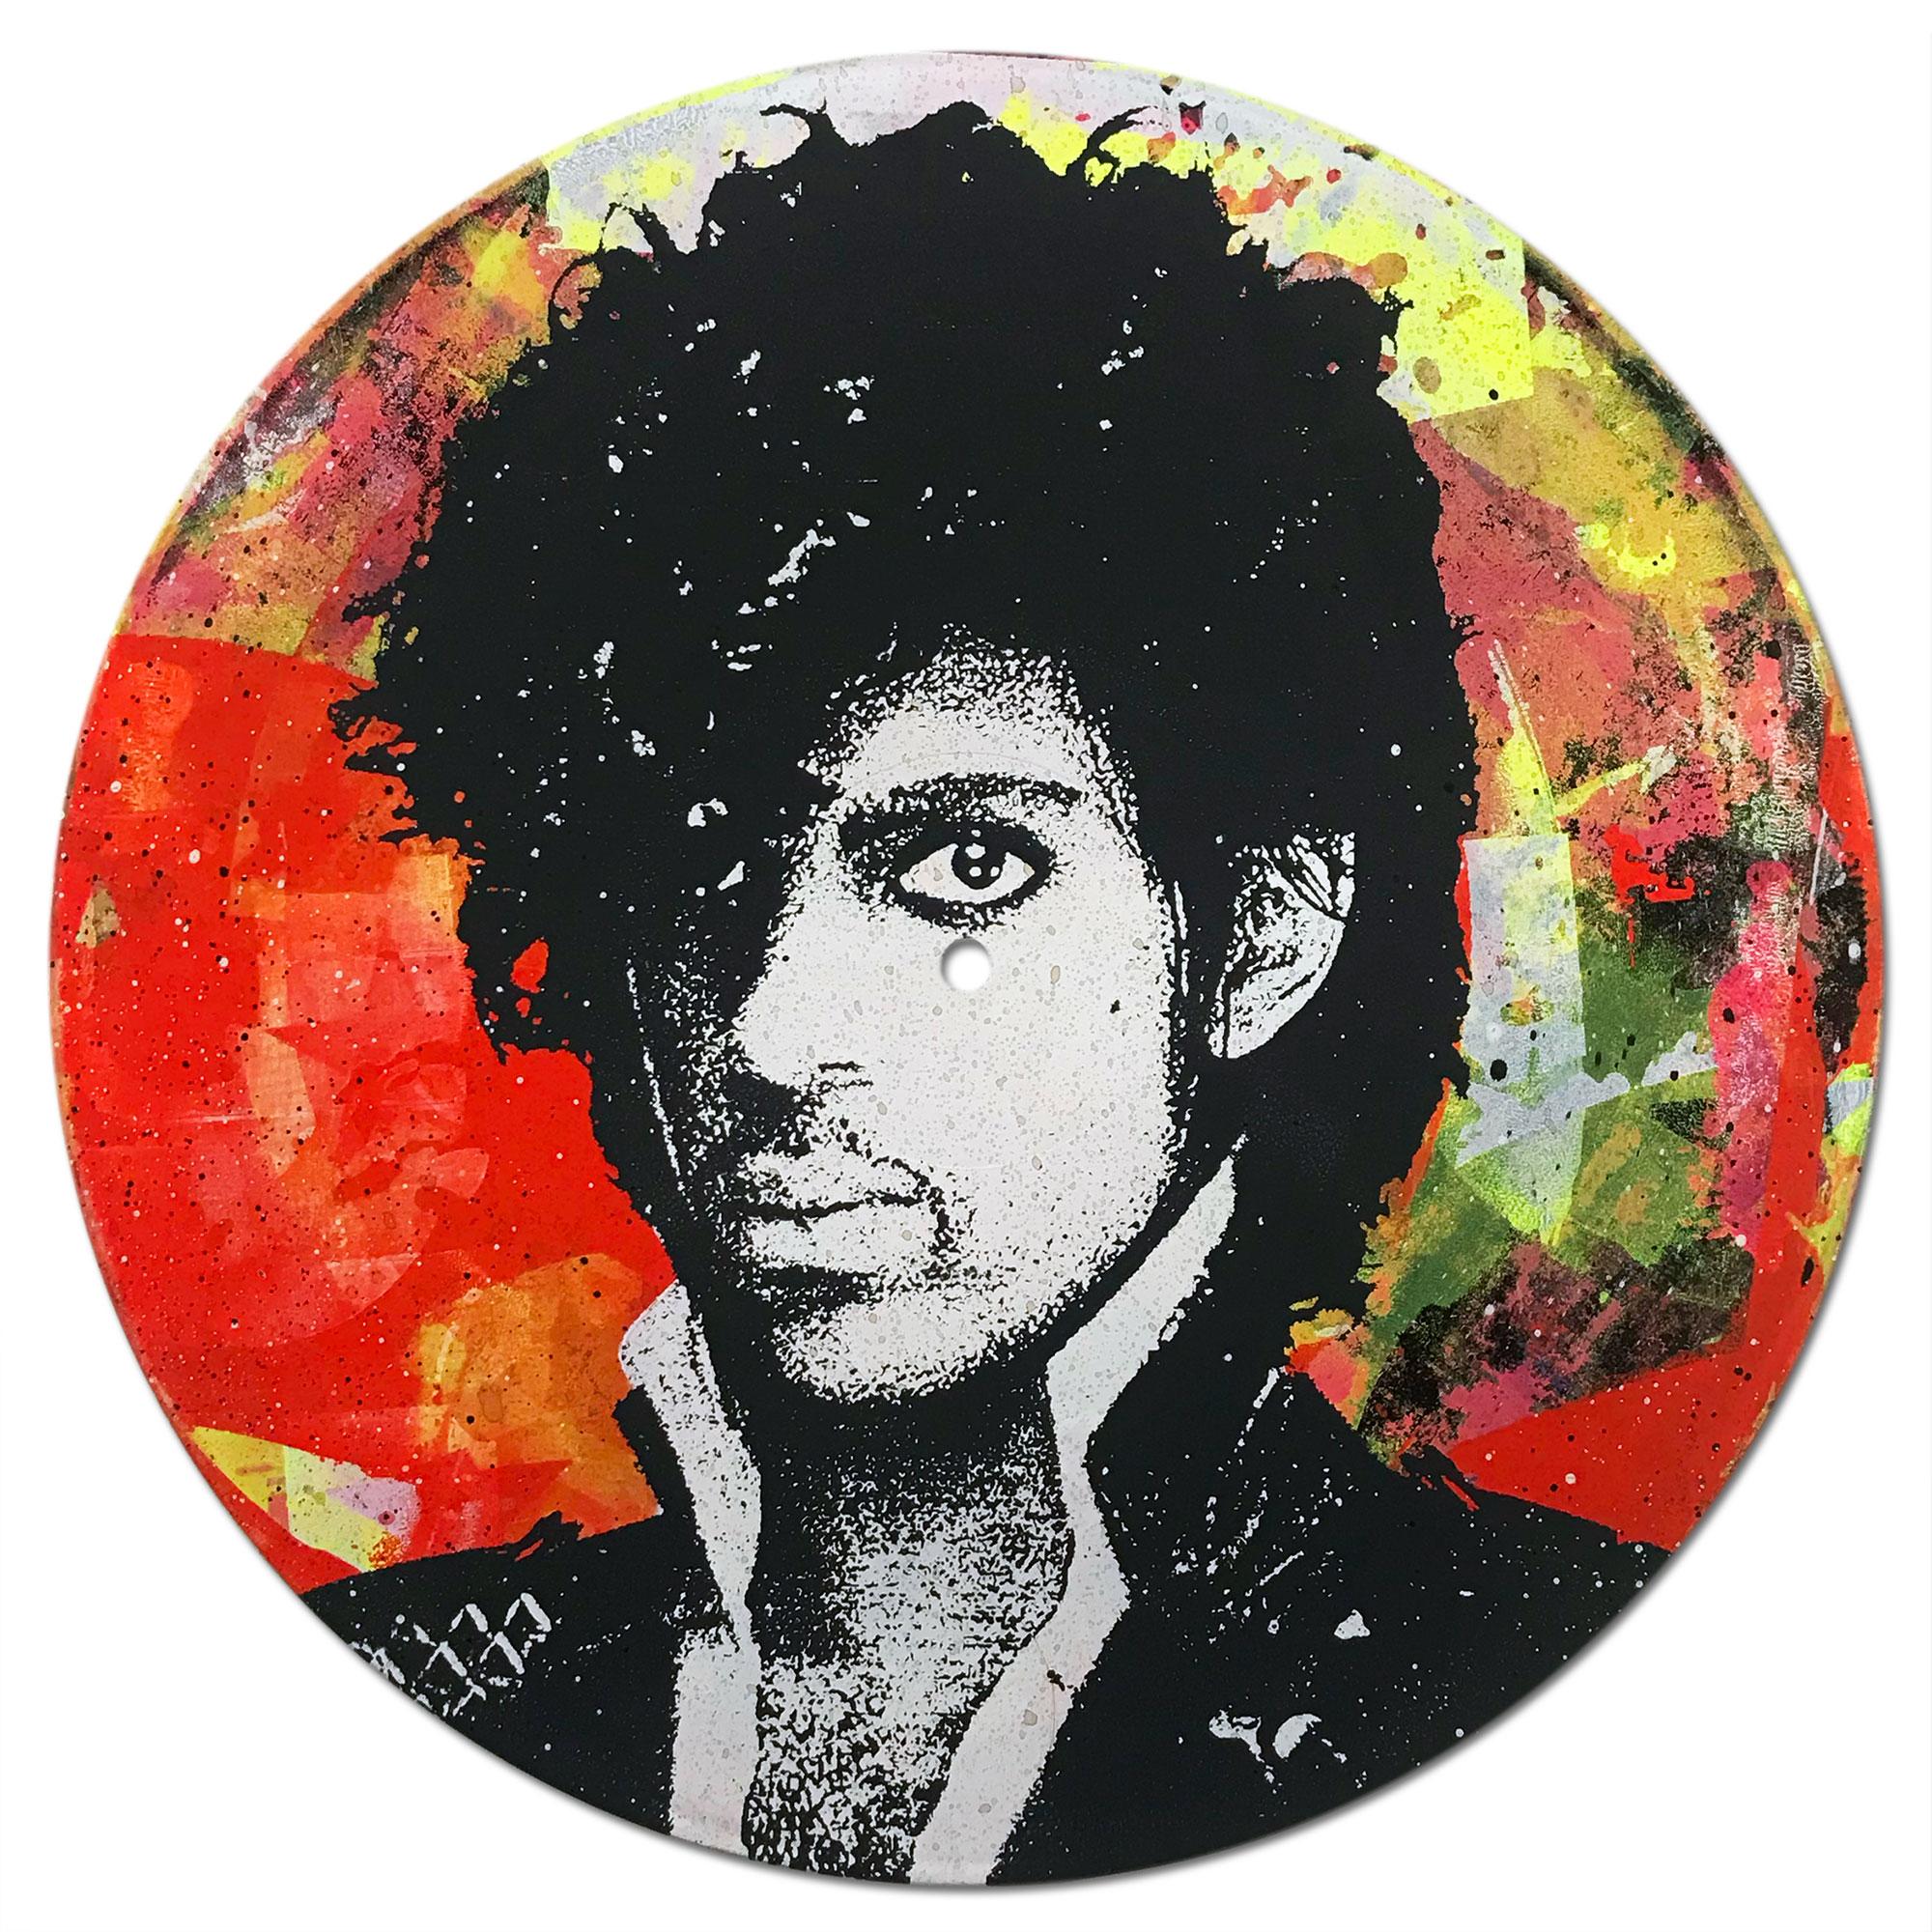 Prince Vinyl, Greg Gossel Pop Art on LP Record Music

Available Editions:  #3, #4, #7

These vinyl LP's were created for Greg Gossel's show 